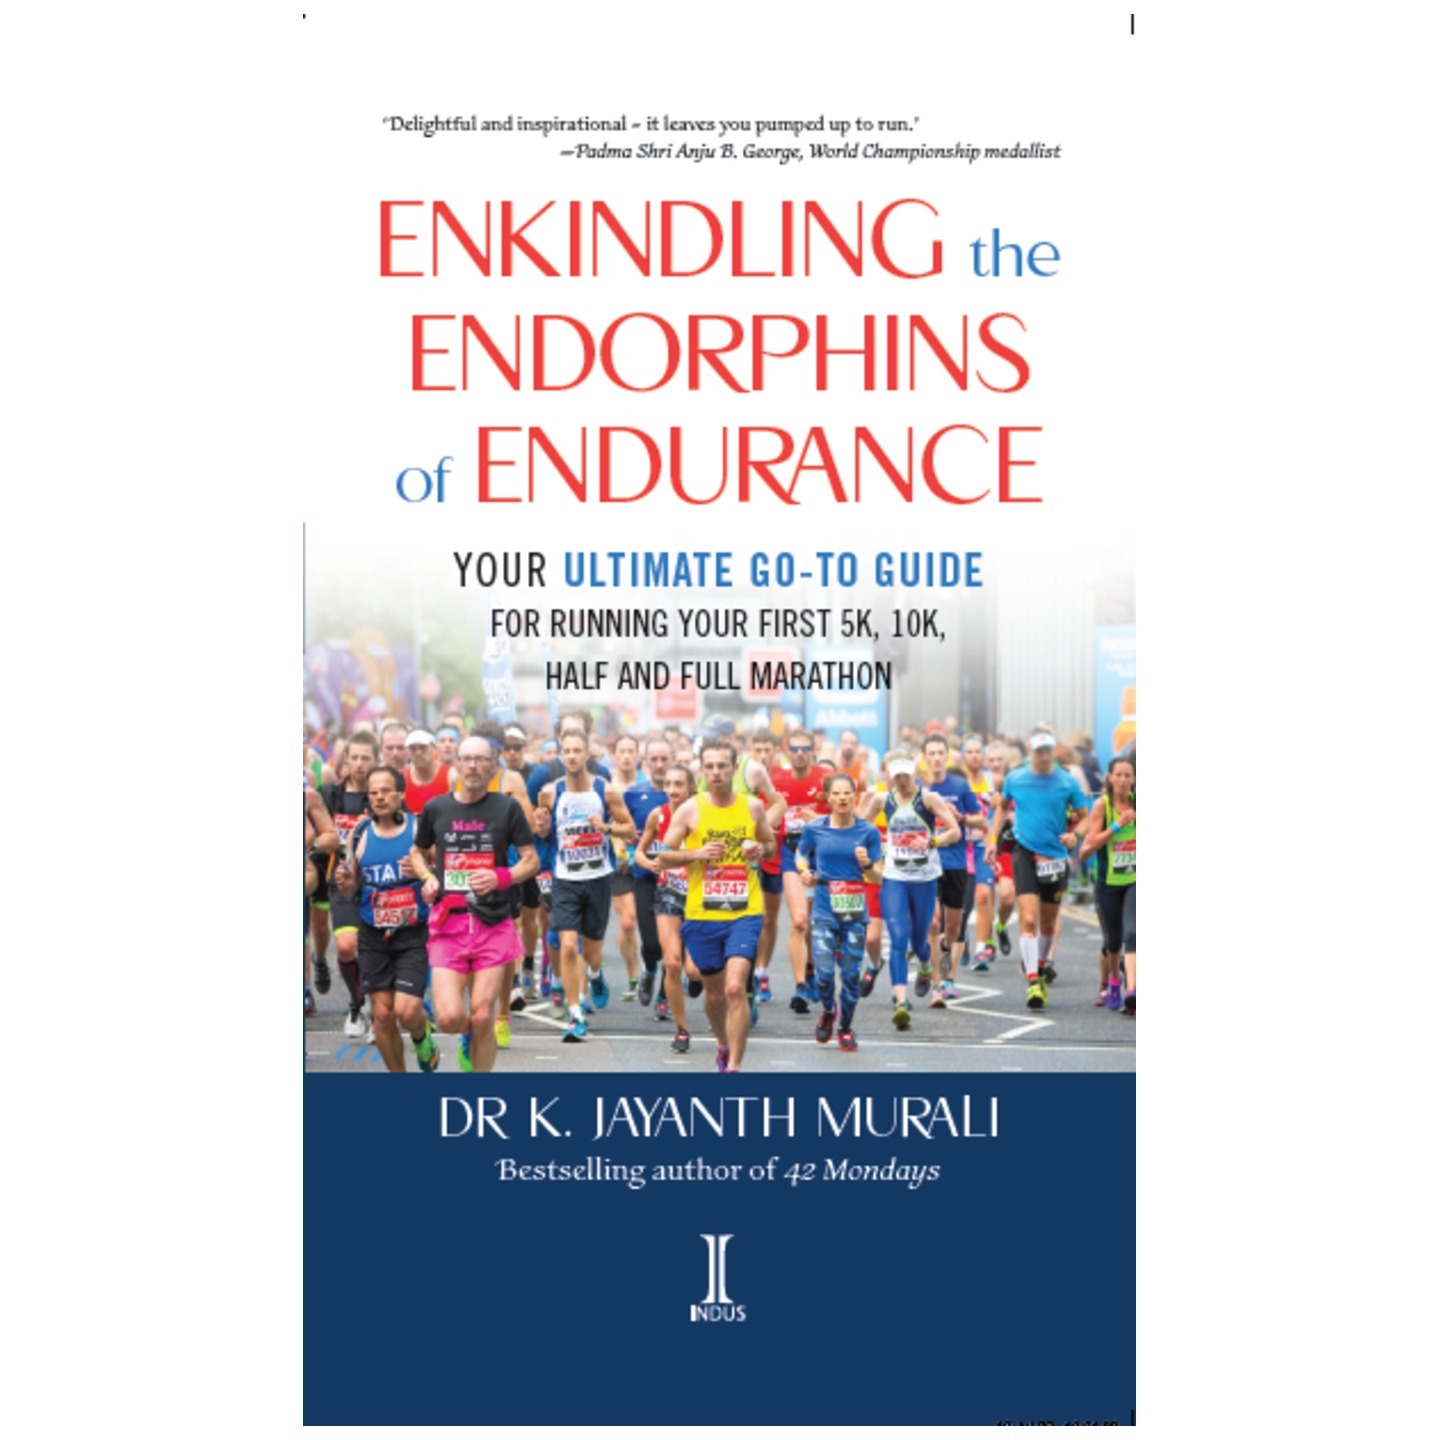 Enkindling the Endorphins of Endurance: Your Ultimate Go to Guide for Running Your First 5k, 10k, Half and Full Marathon